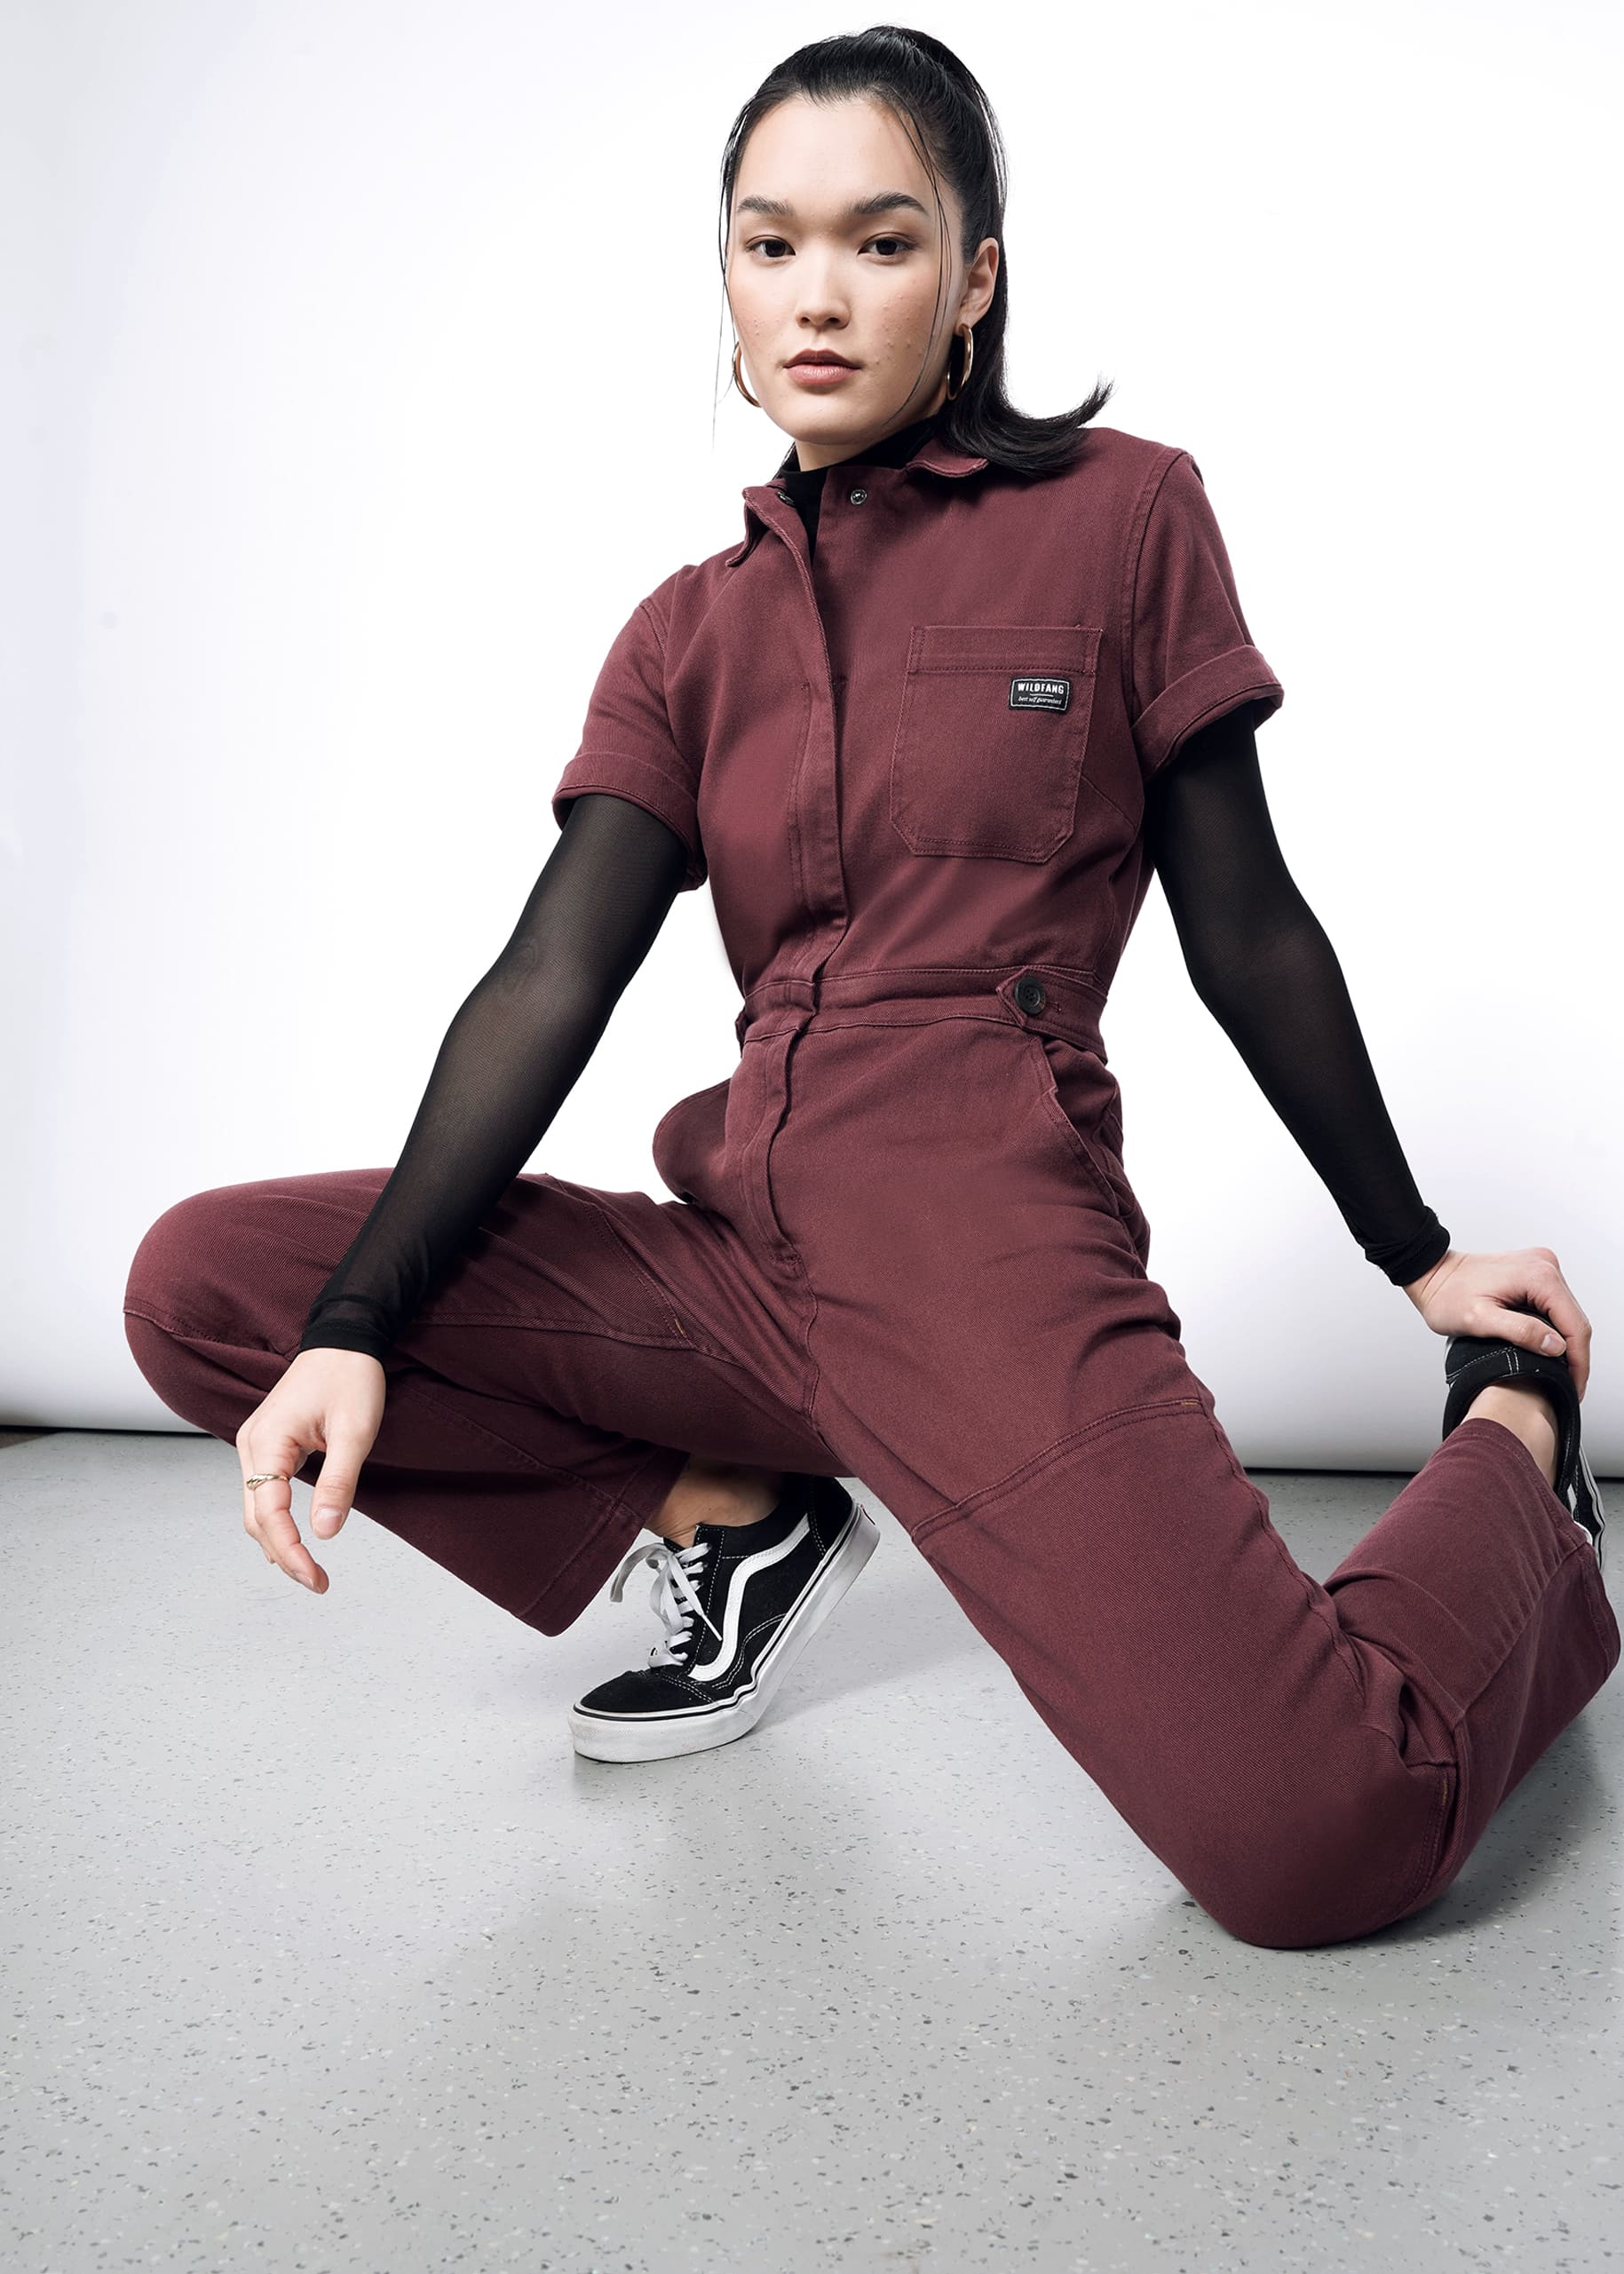 The Essential Denim High Waisted Coverall in Merlot